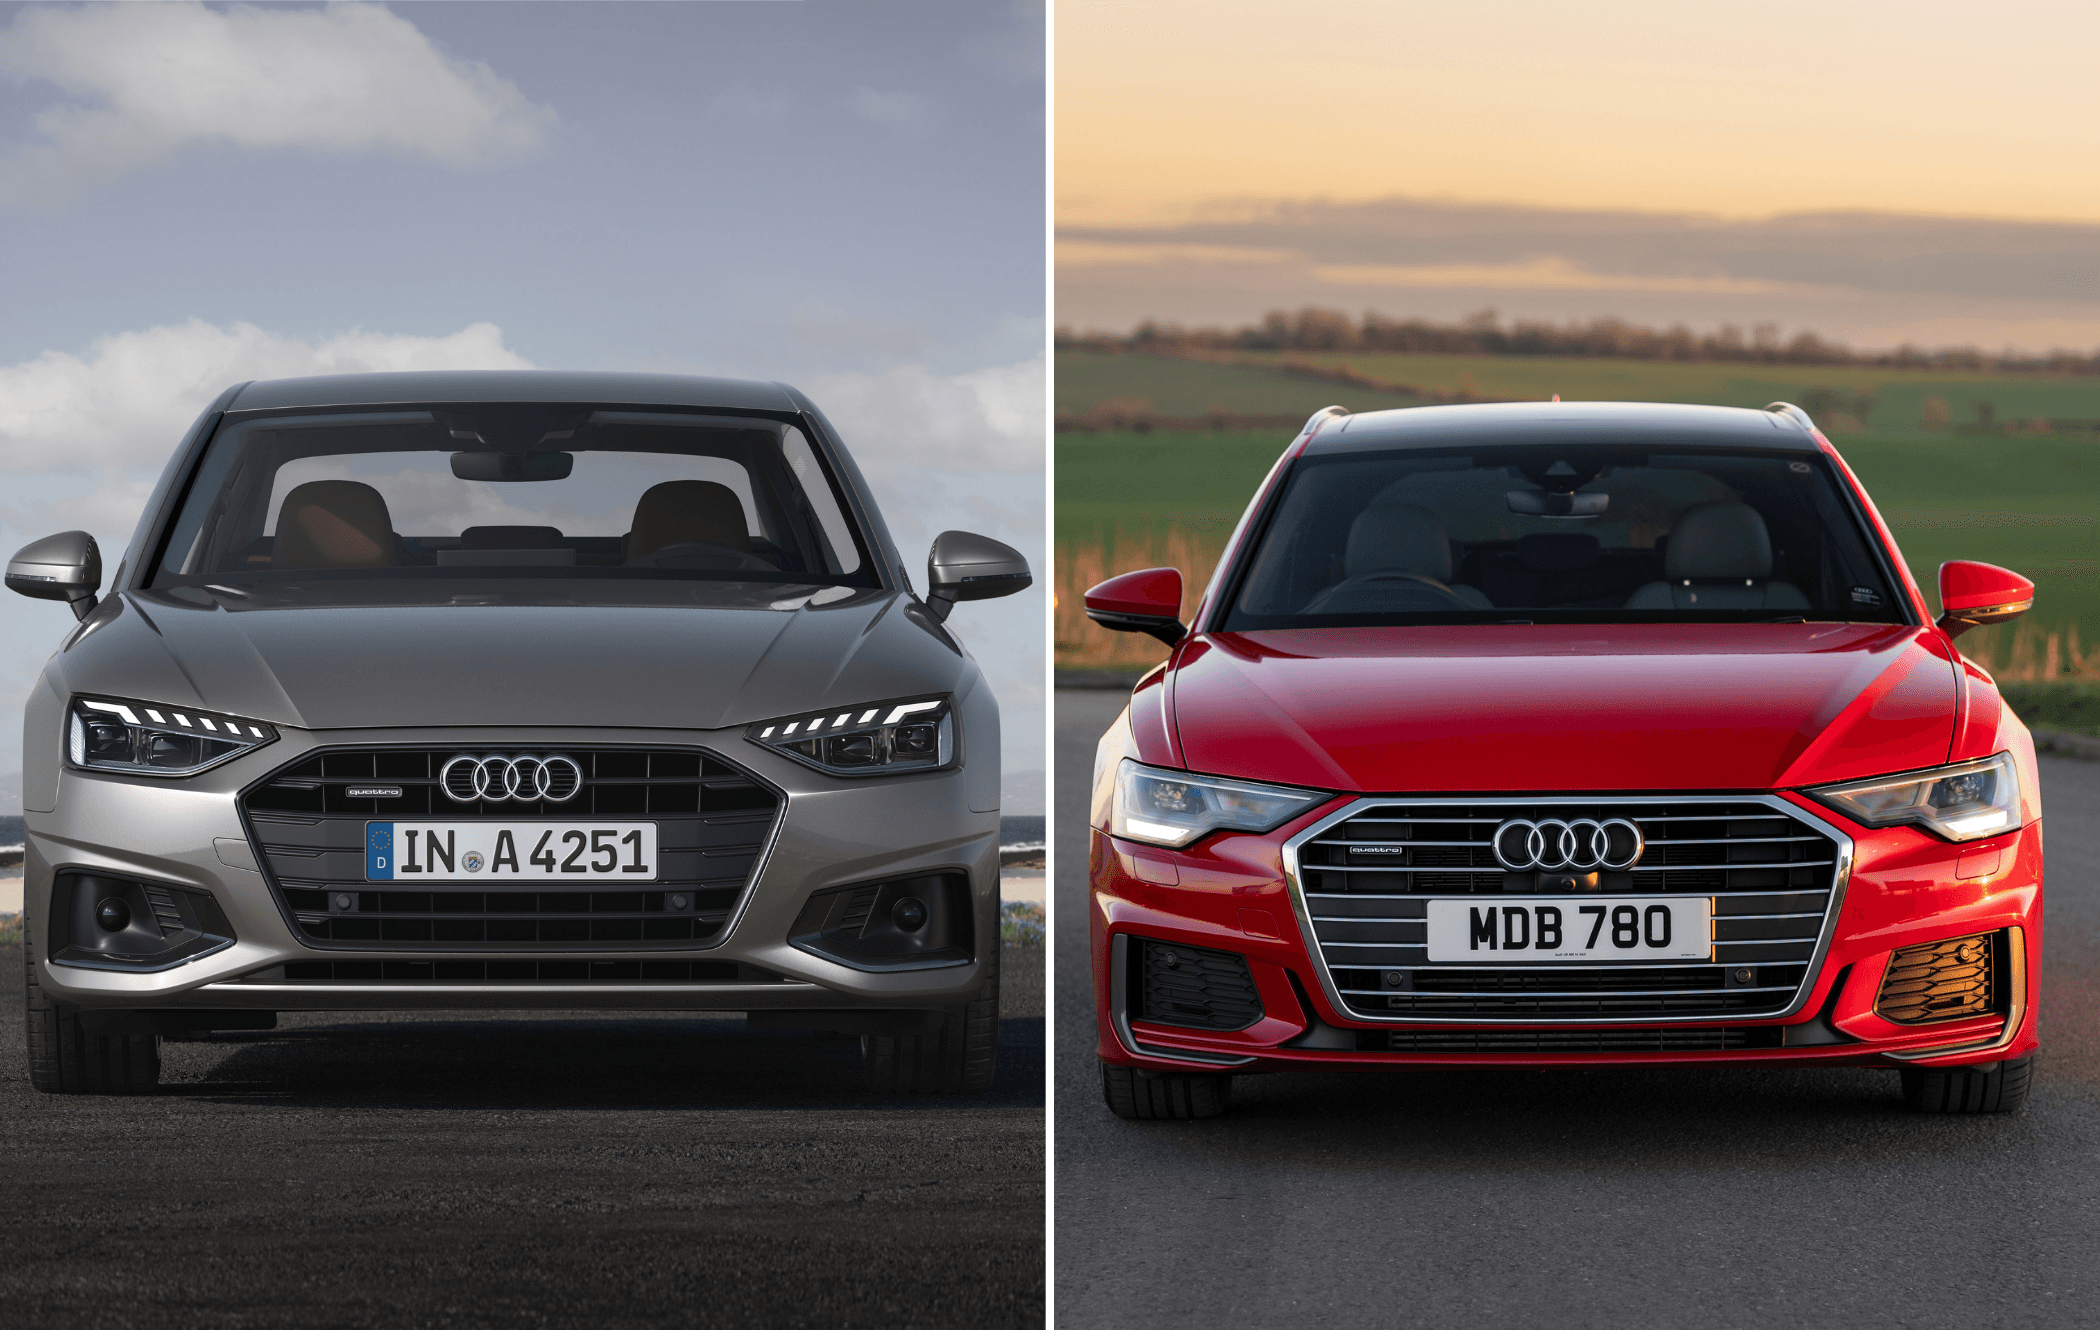 A comparison of the Audi A4 and Audi A6 models